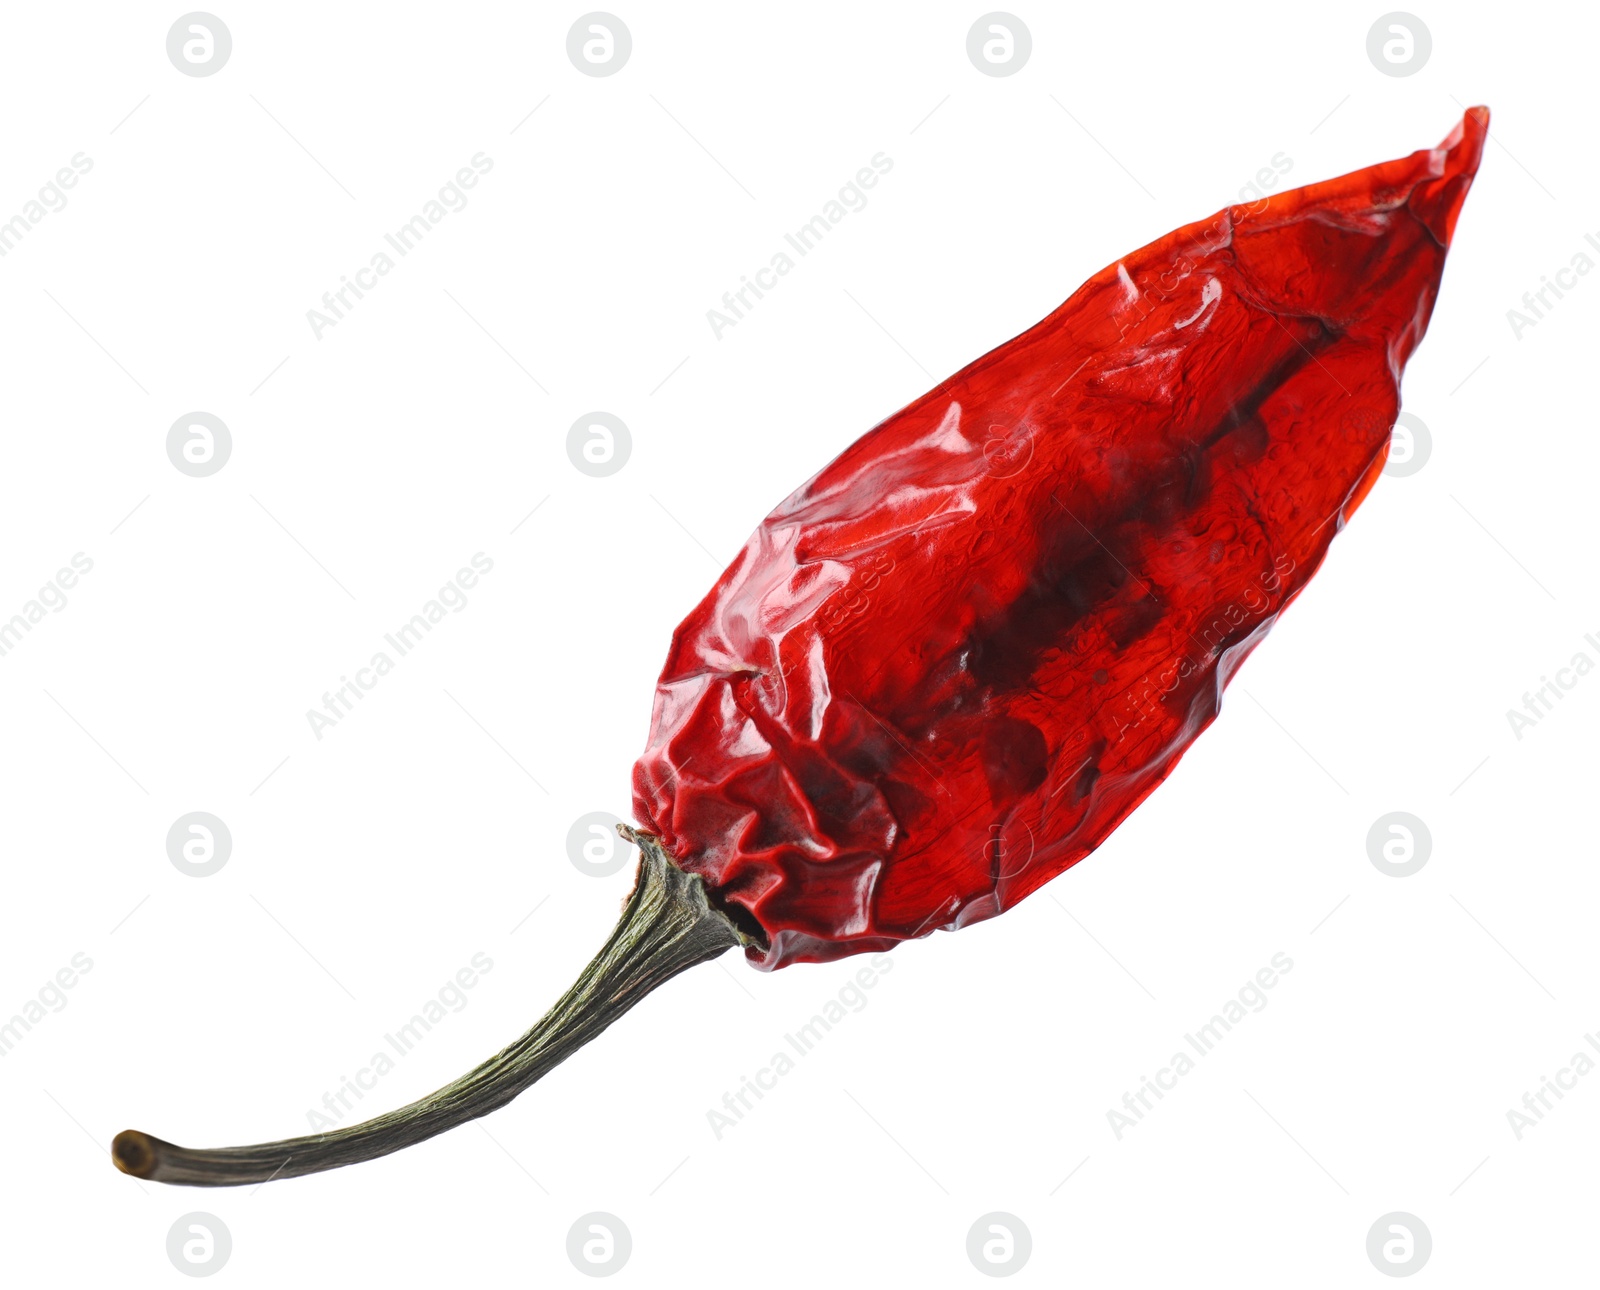 Photo of Dry red chili pepper isolated on white